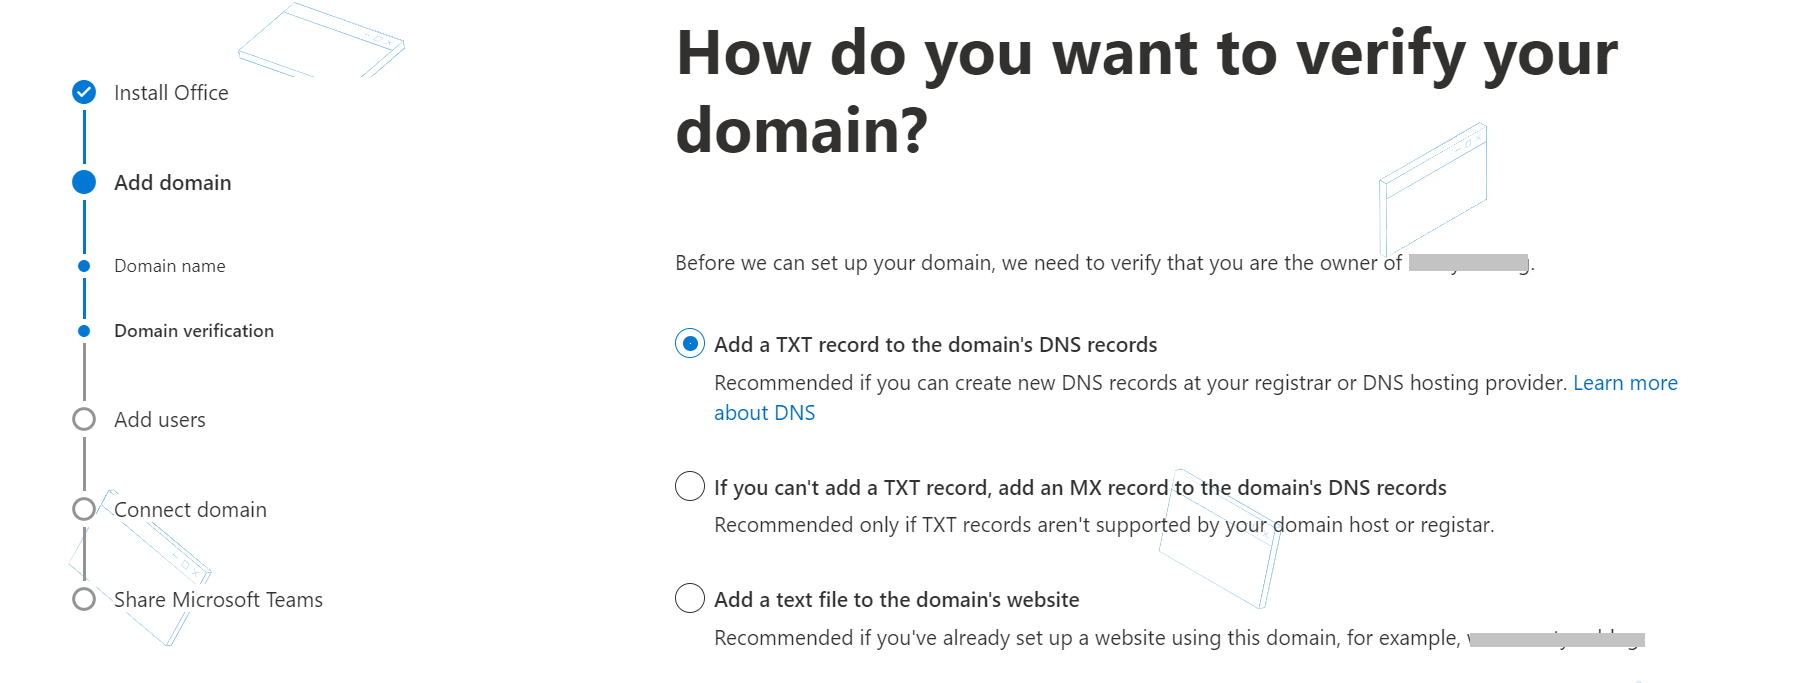 Verifying domain with Office 365